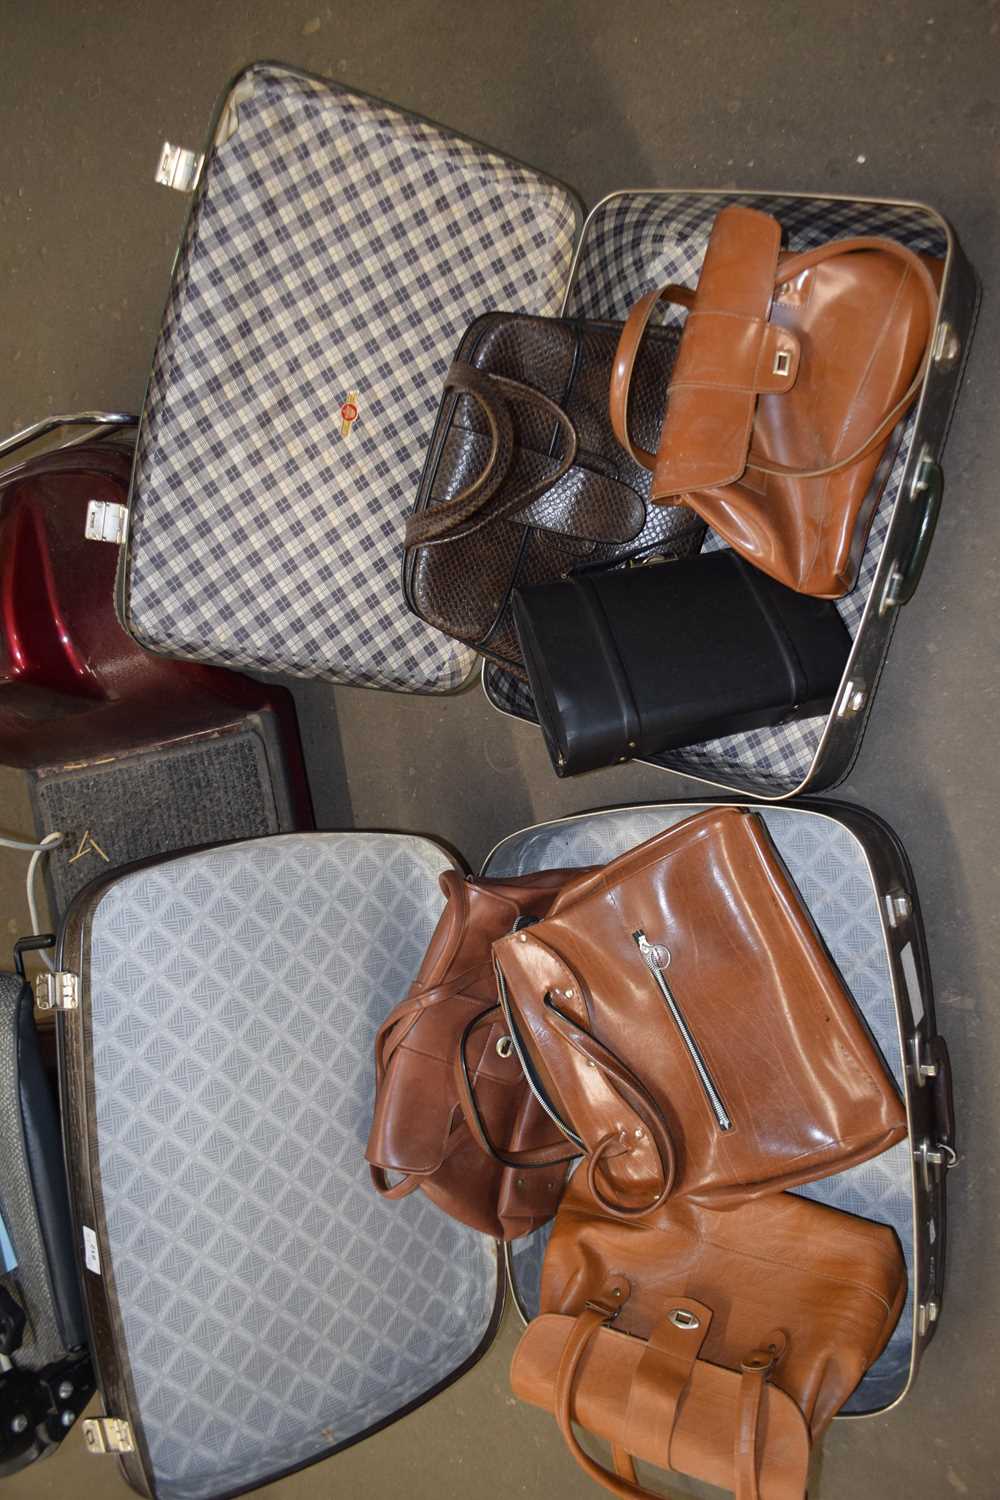 Two suitcases and assorted handbags